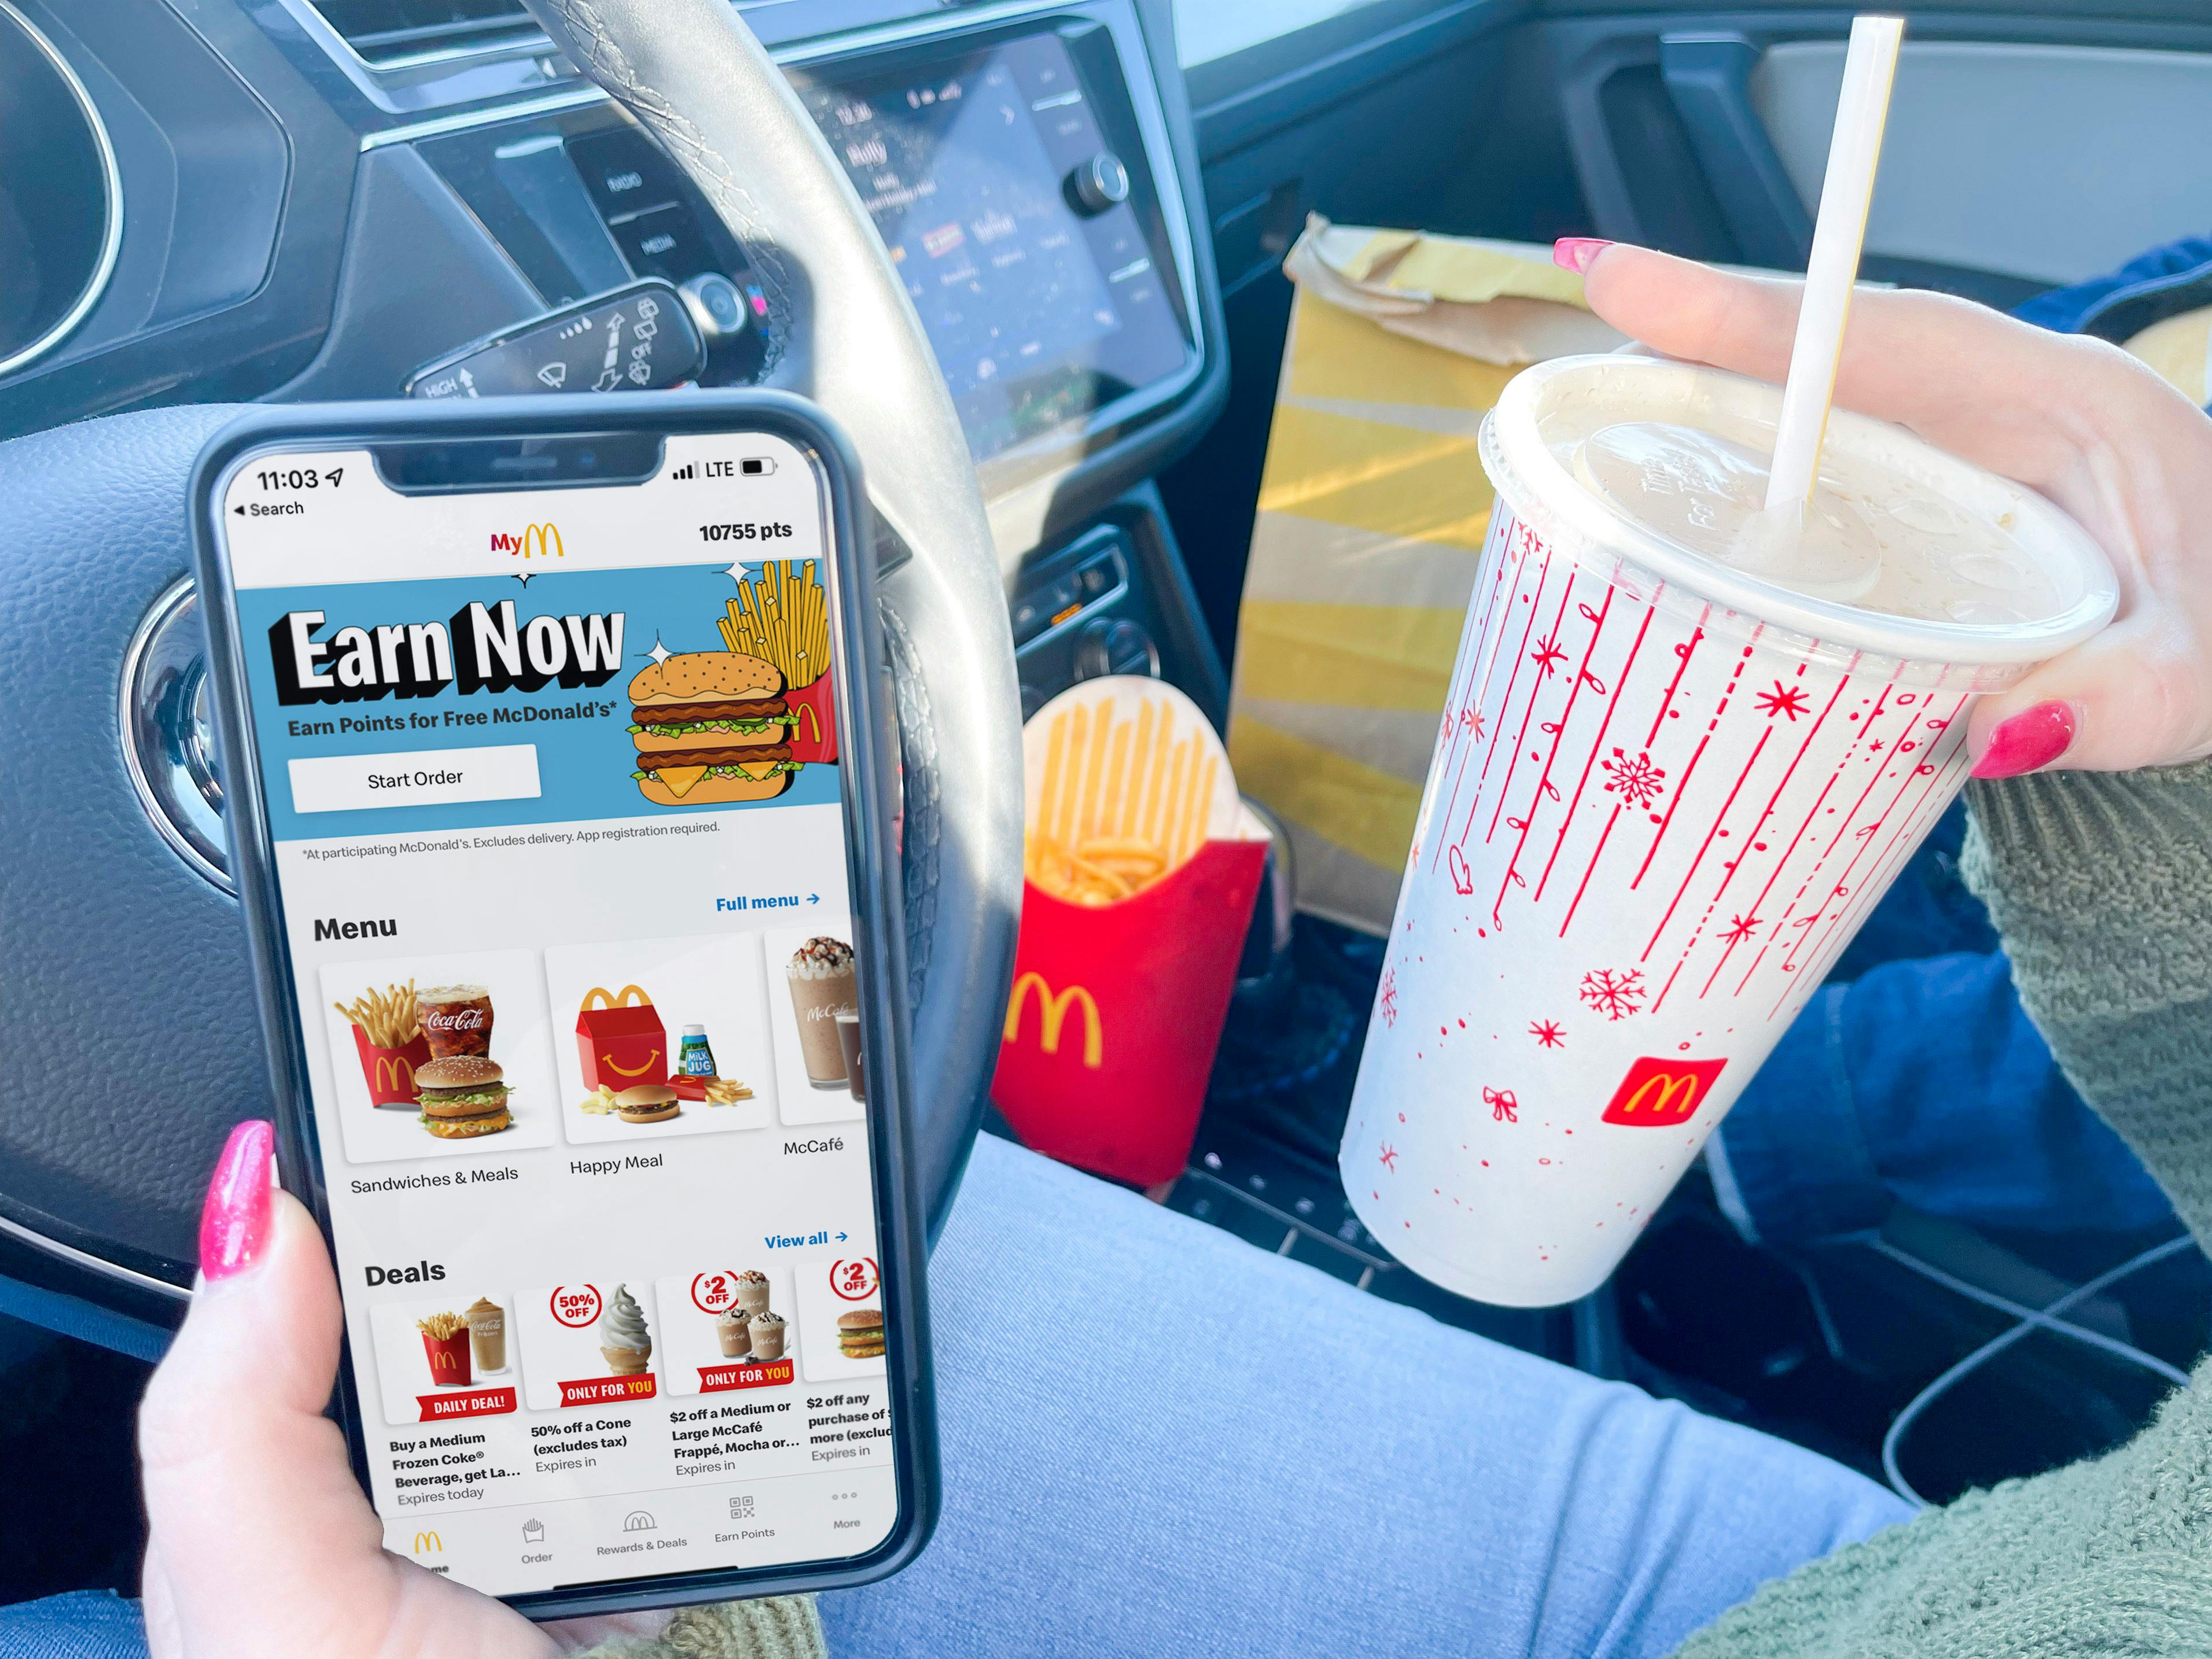 A person sitting in a car while holding an iPhone which is open to the McDonald's mobile app Menu in one hand, and a McDonalds fountain drink in the other hand. On the passenger's seat in the background, there is a box of McDonald's fries and a McDonald's take out bag.